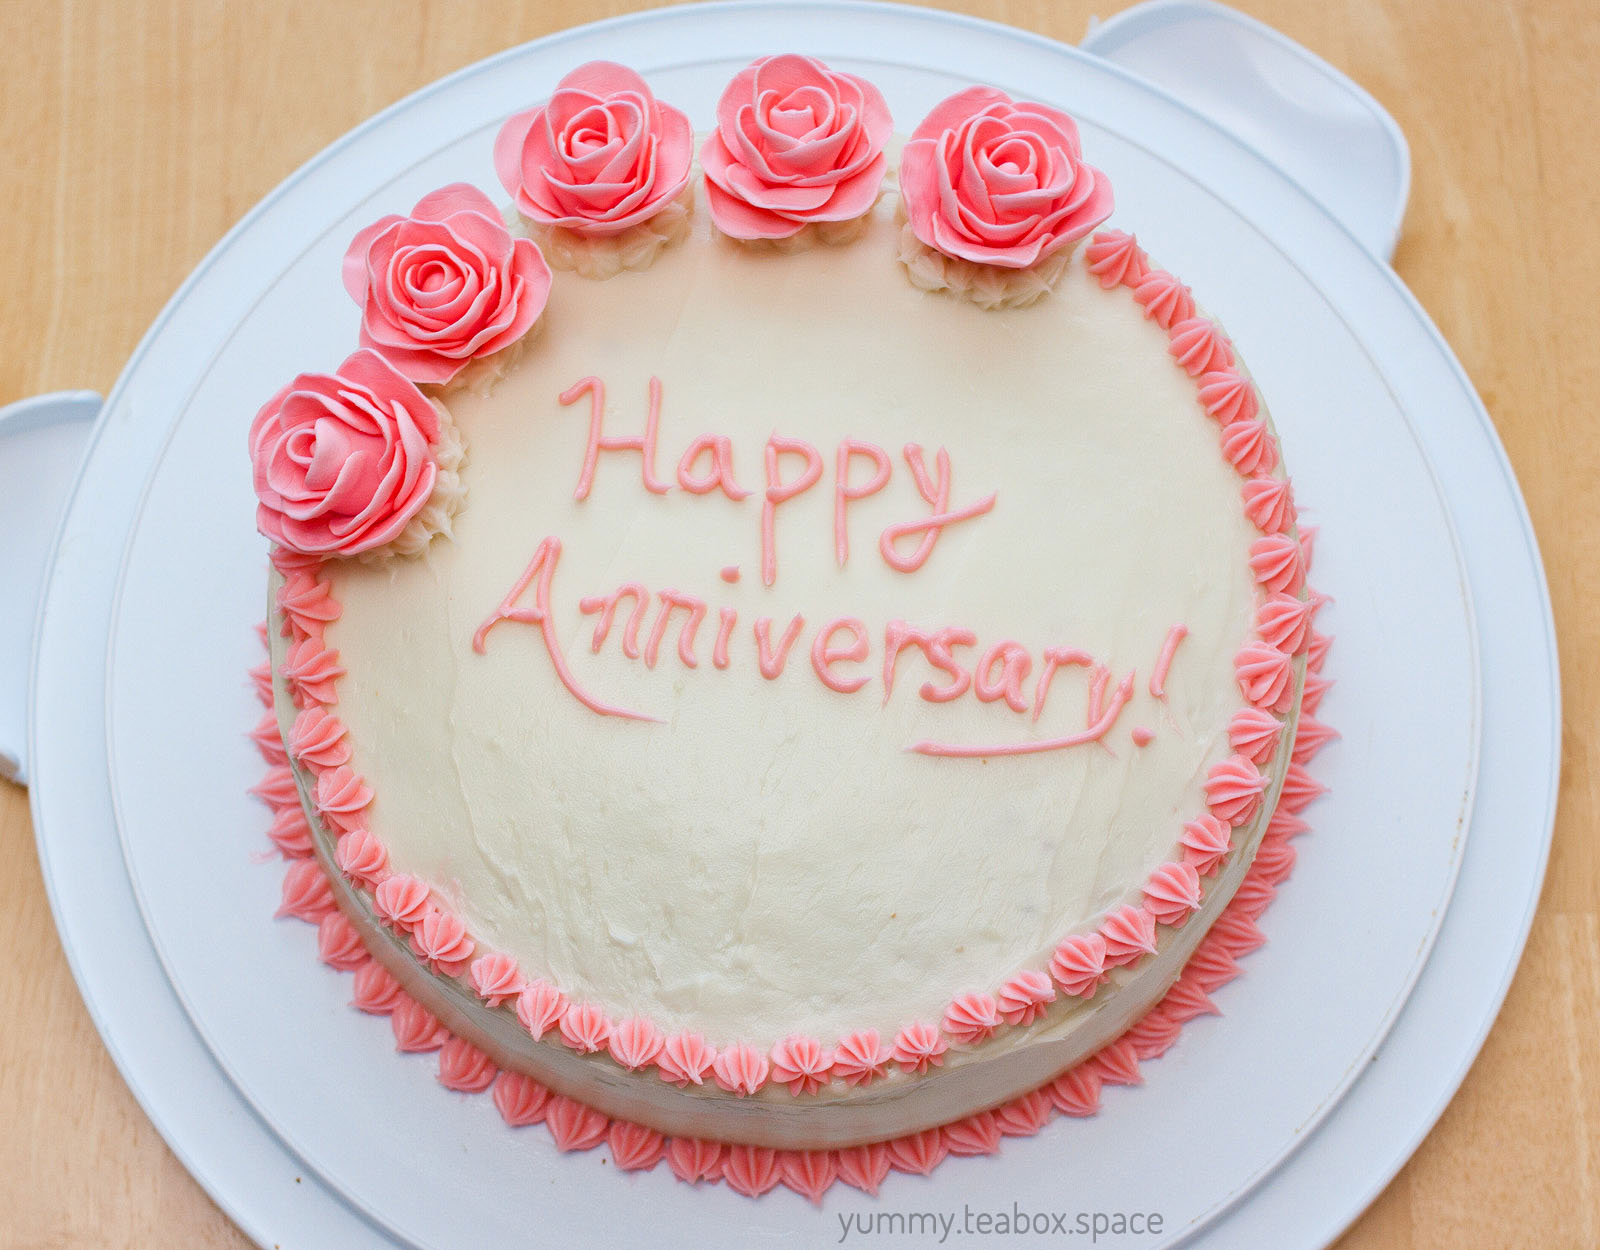 Round white cake with a pink border and five pink roses on the top left. The cake says Happy Anniversary.